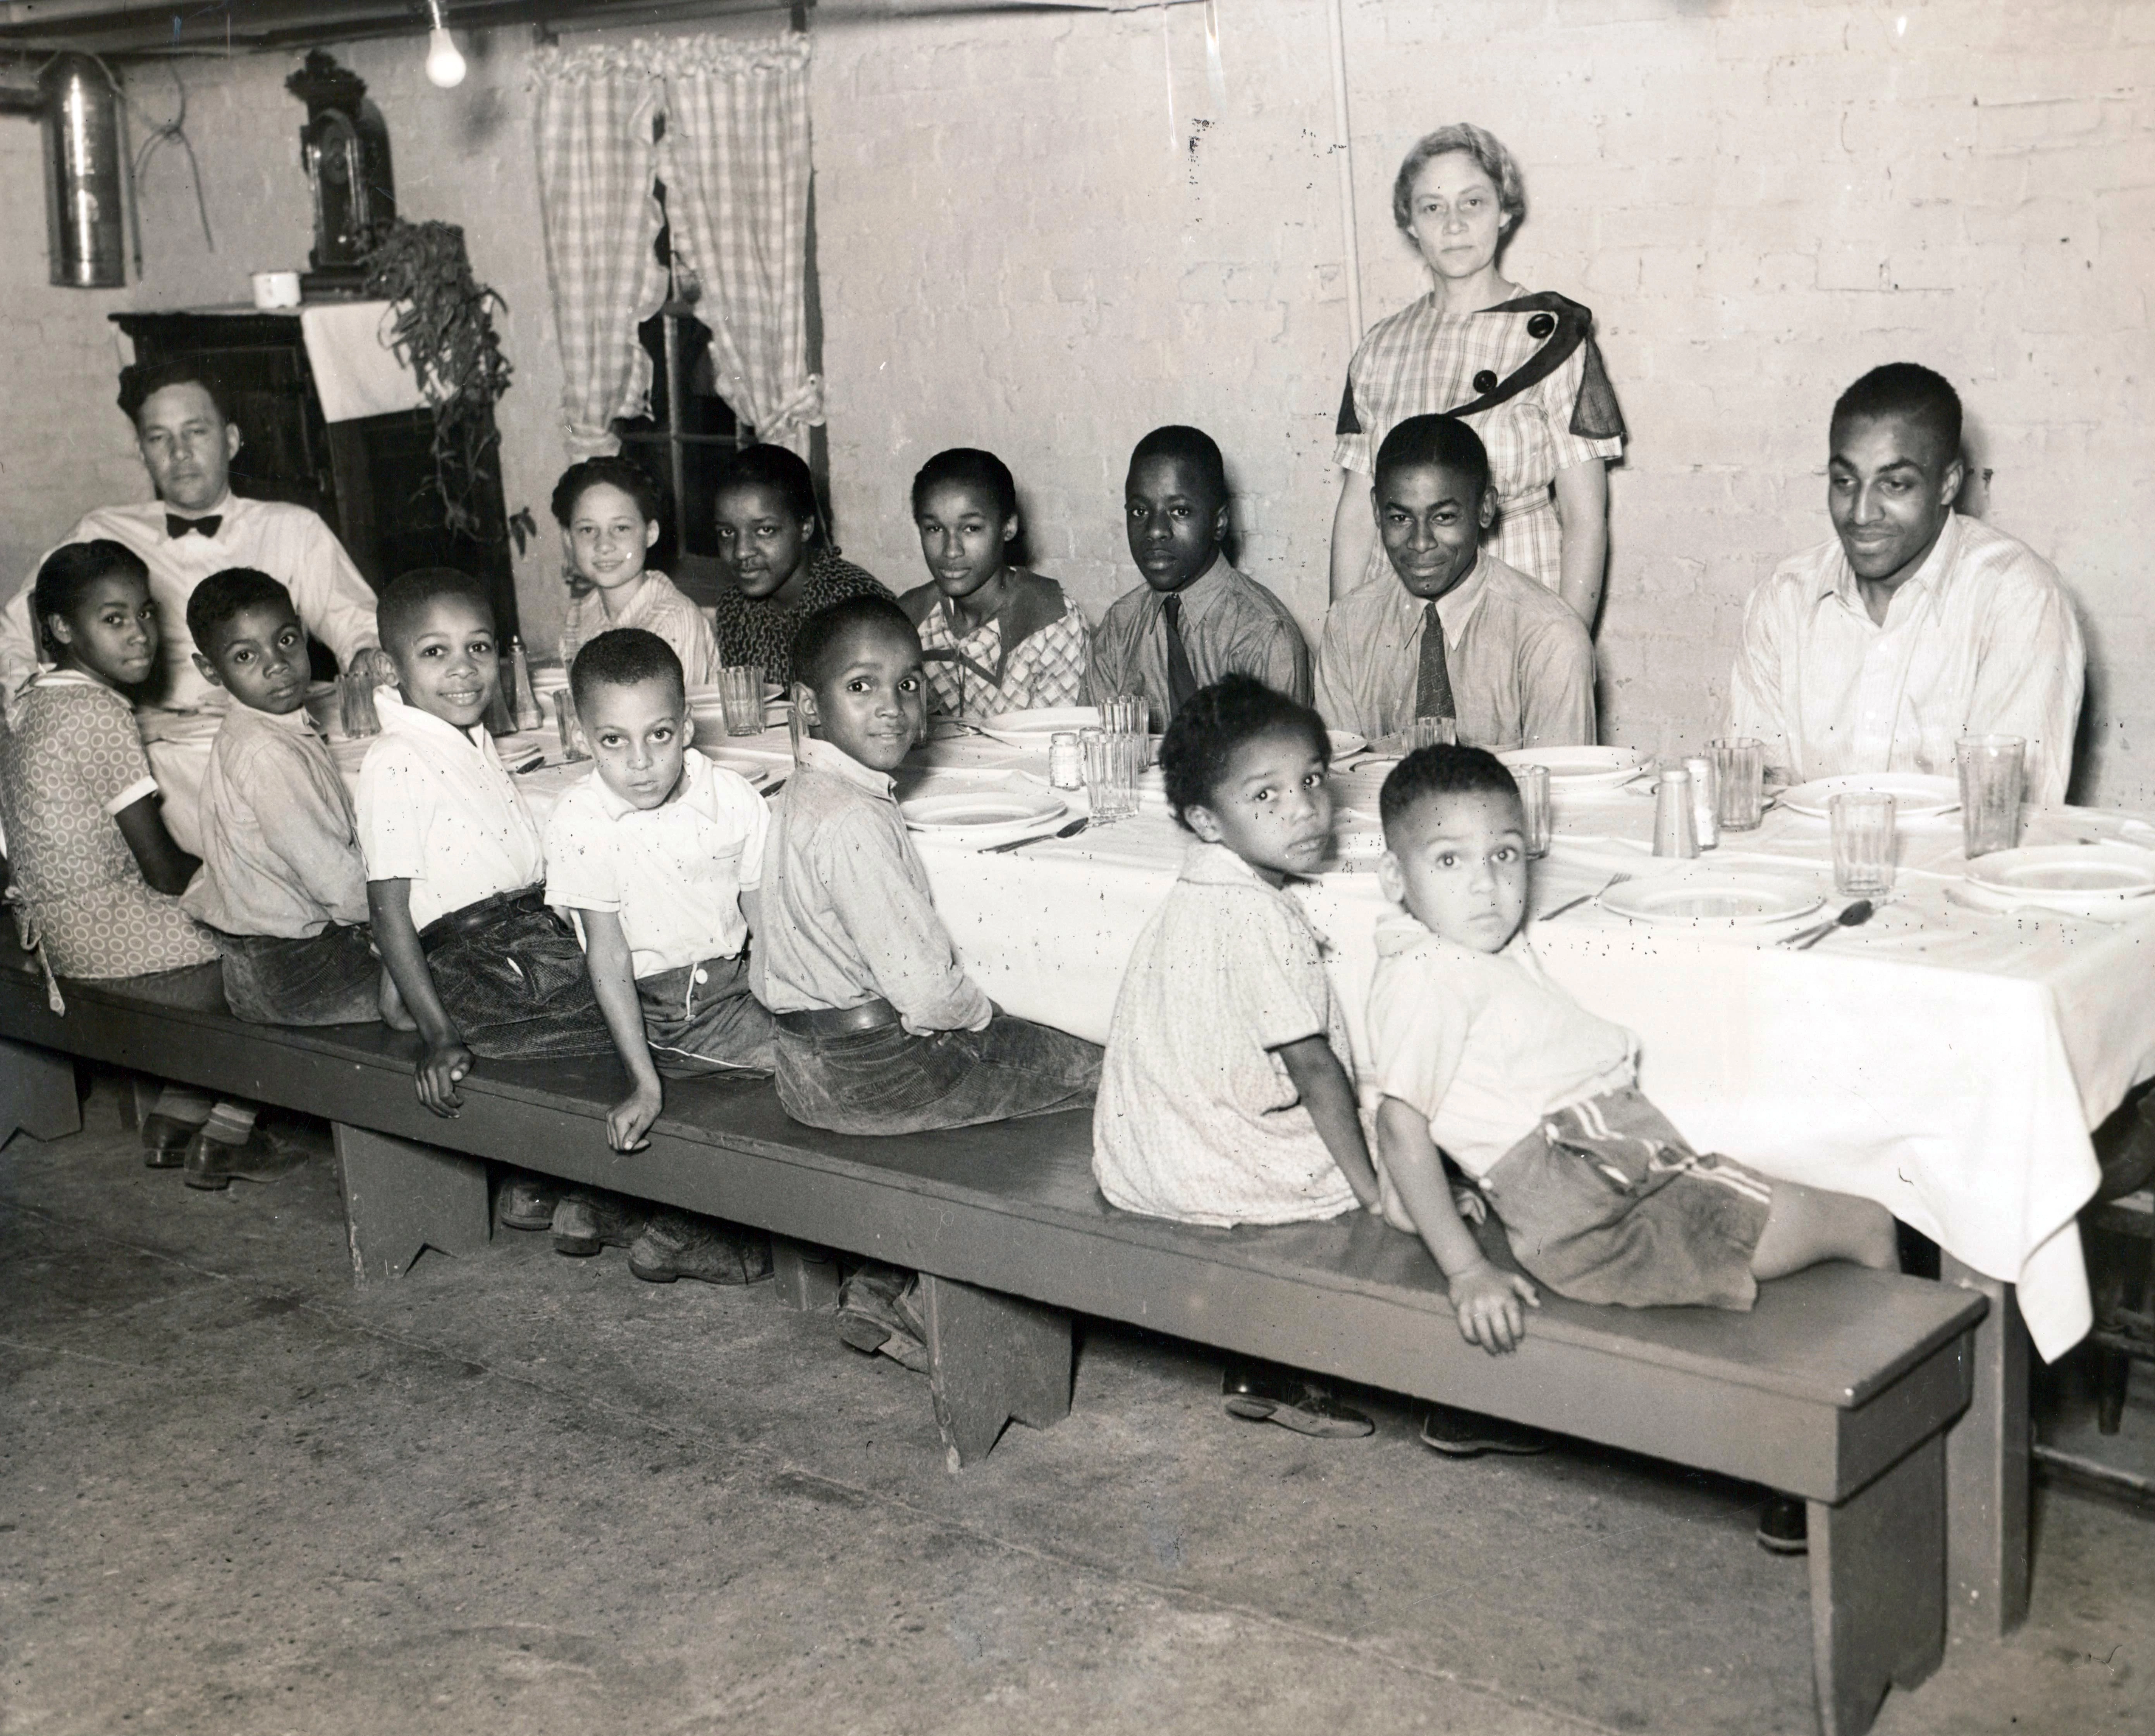 13 children and young adults sit on a long bench at a table. The table has a white table cloth and place settings for each person. One man is at the head of the table, wearing a bow tie. A woman stands behind the table in a dress. They are all looking at the camera, many of the children are smiling. All of the people in the photograph are African American. The walls appear to be lightly-painted brick.